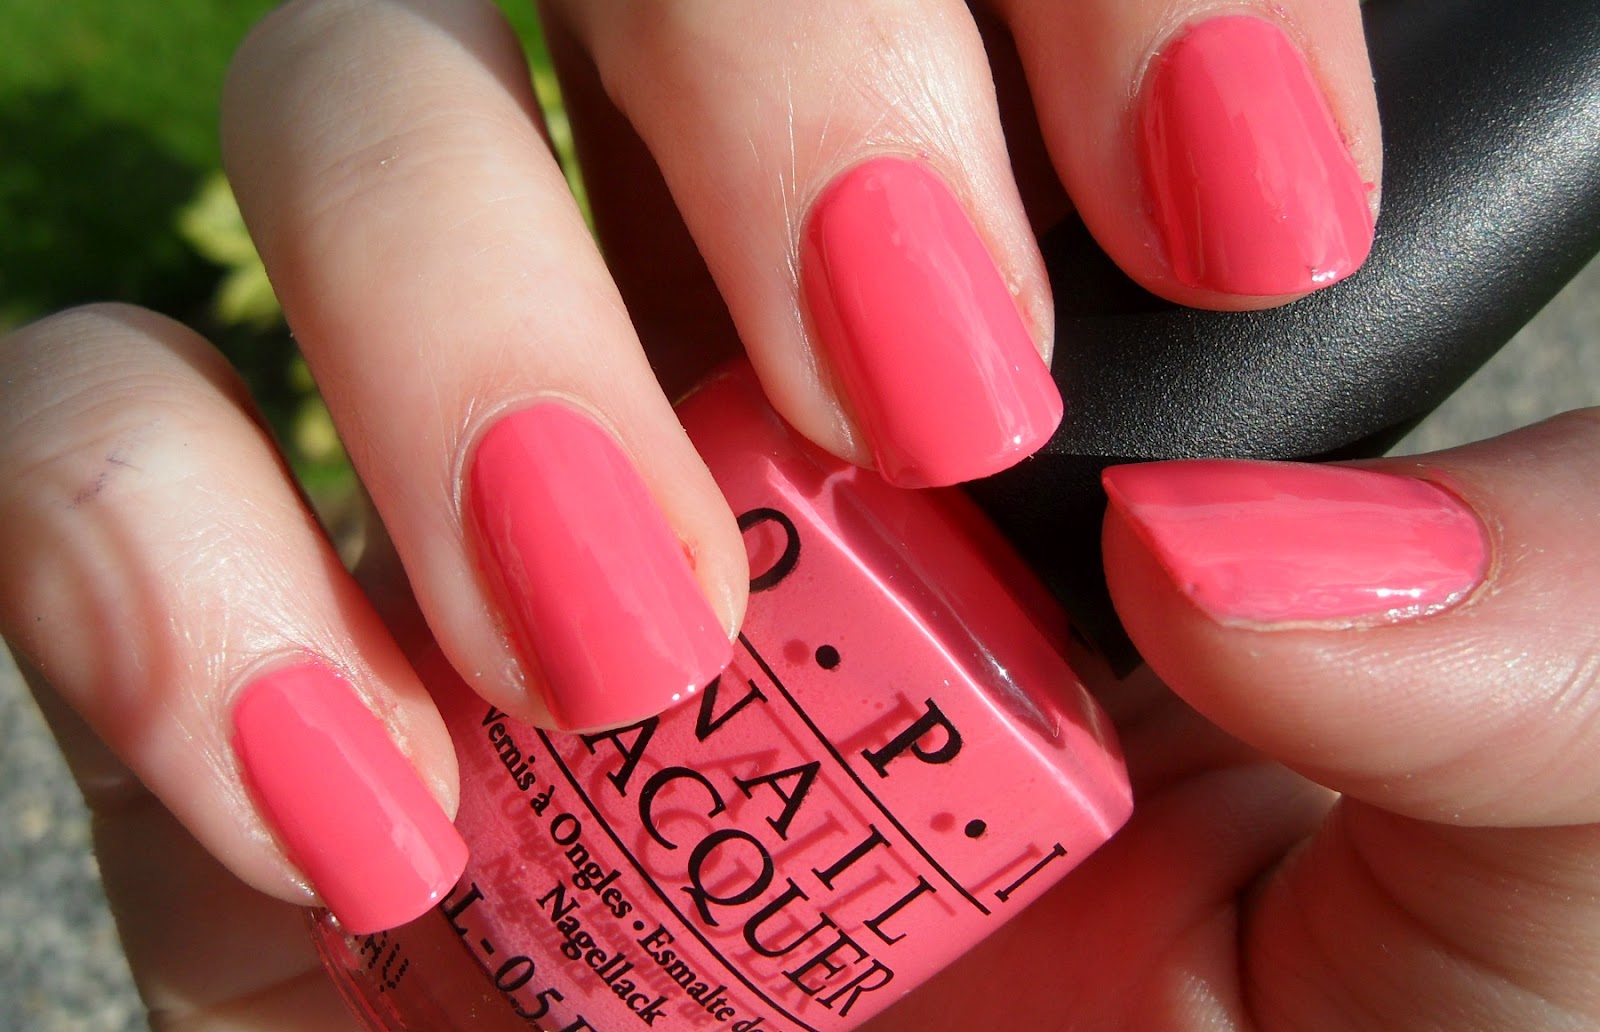 5. OPI GelColor in "Strawberry Margarita" - wide 4